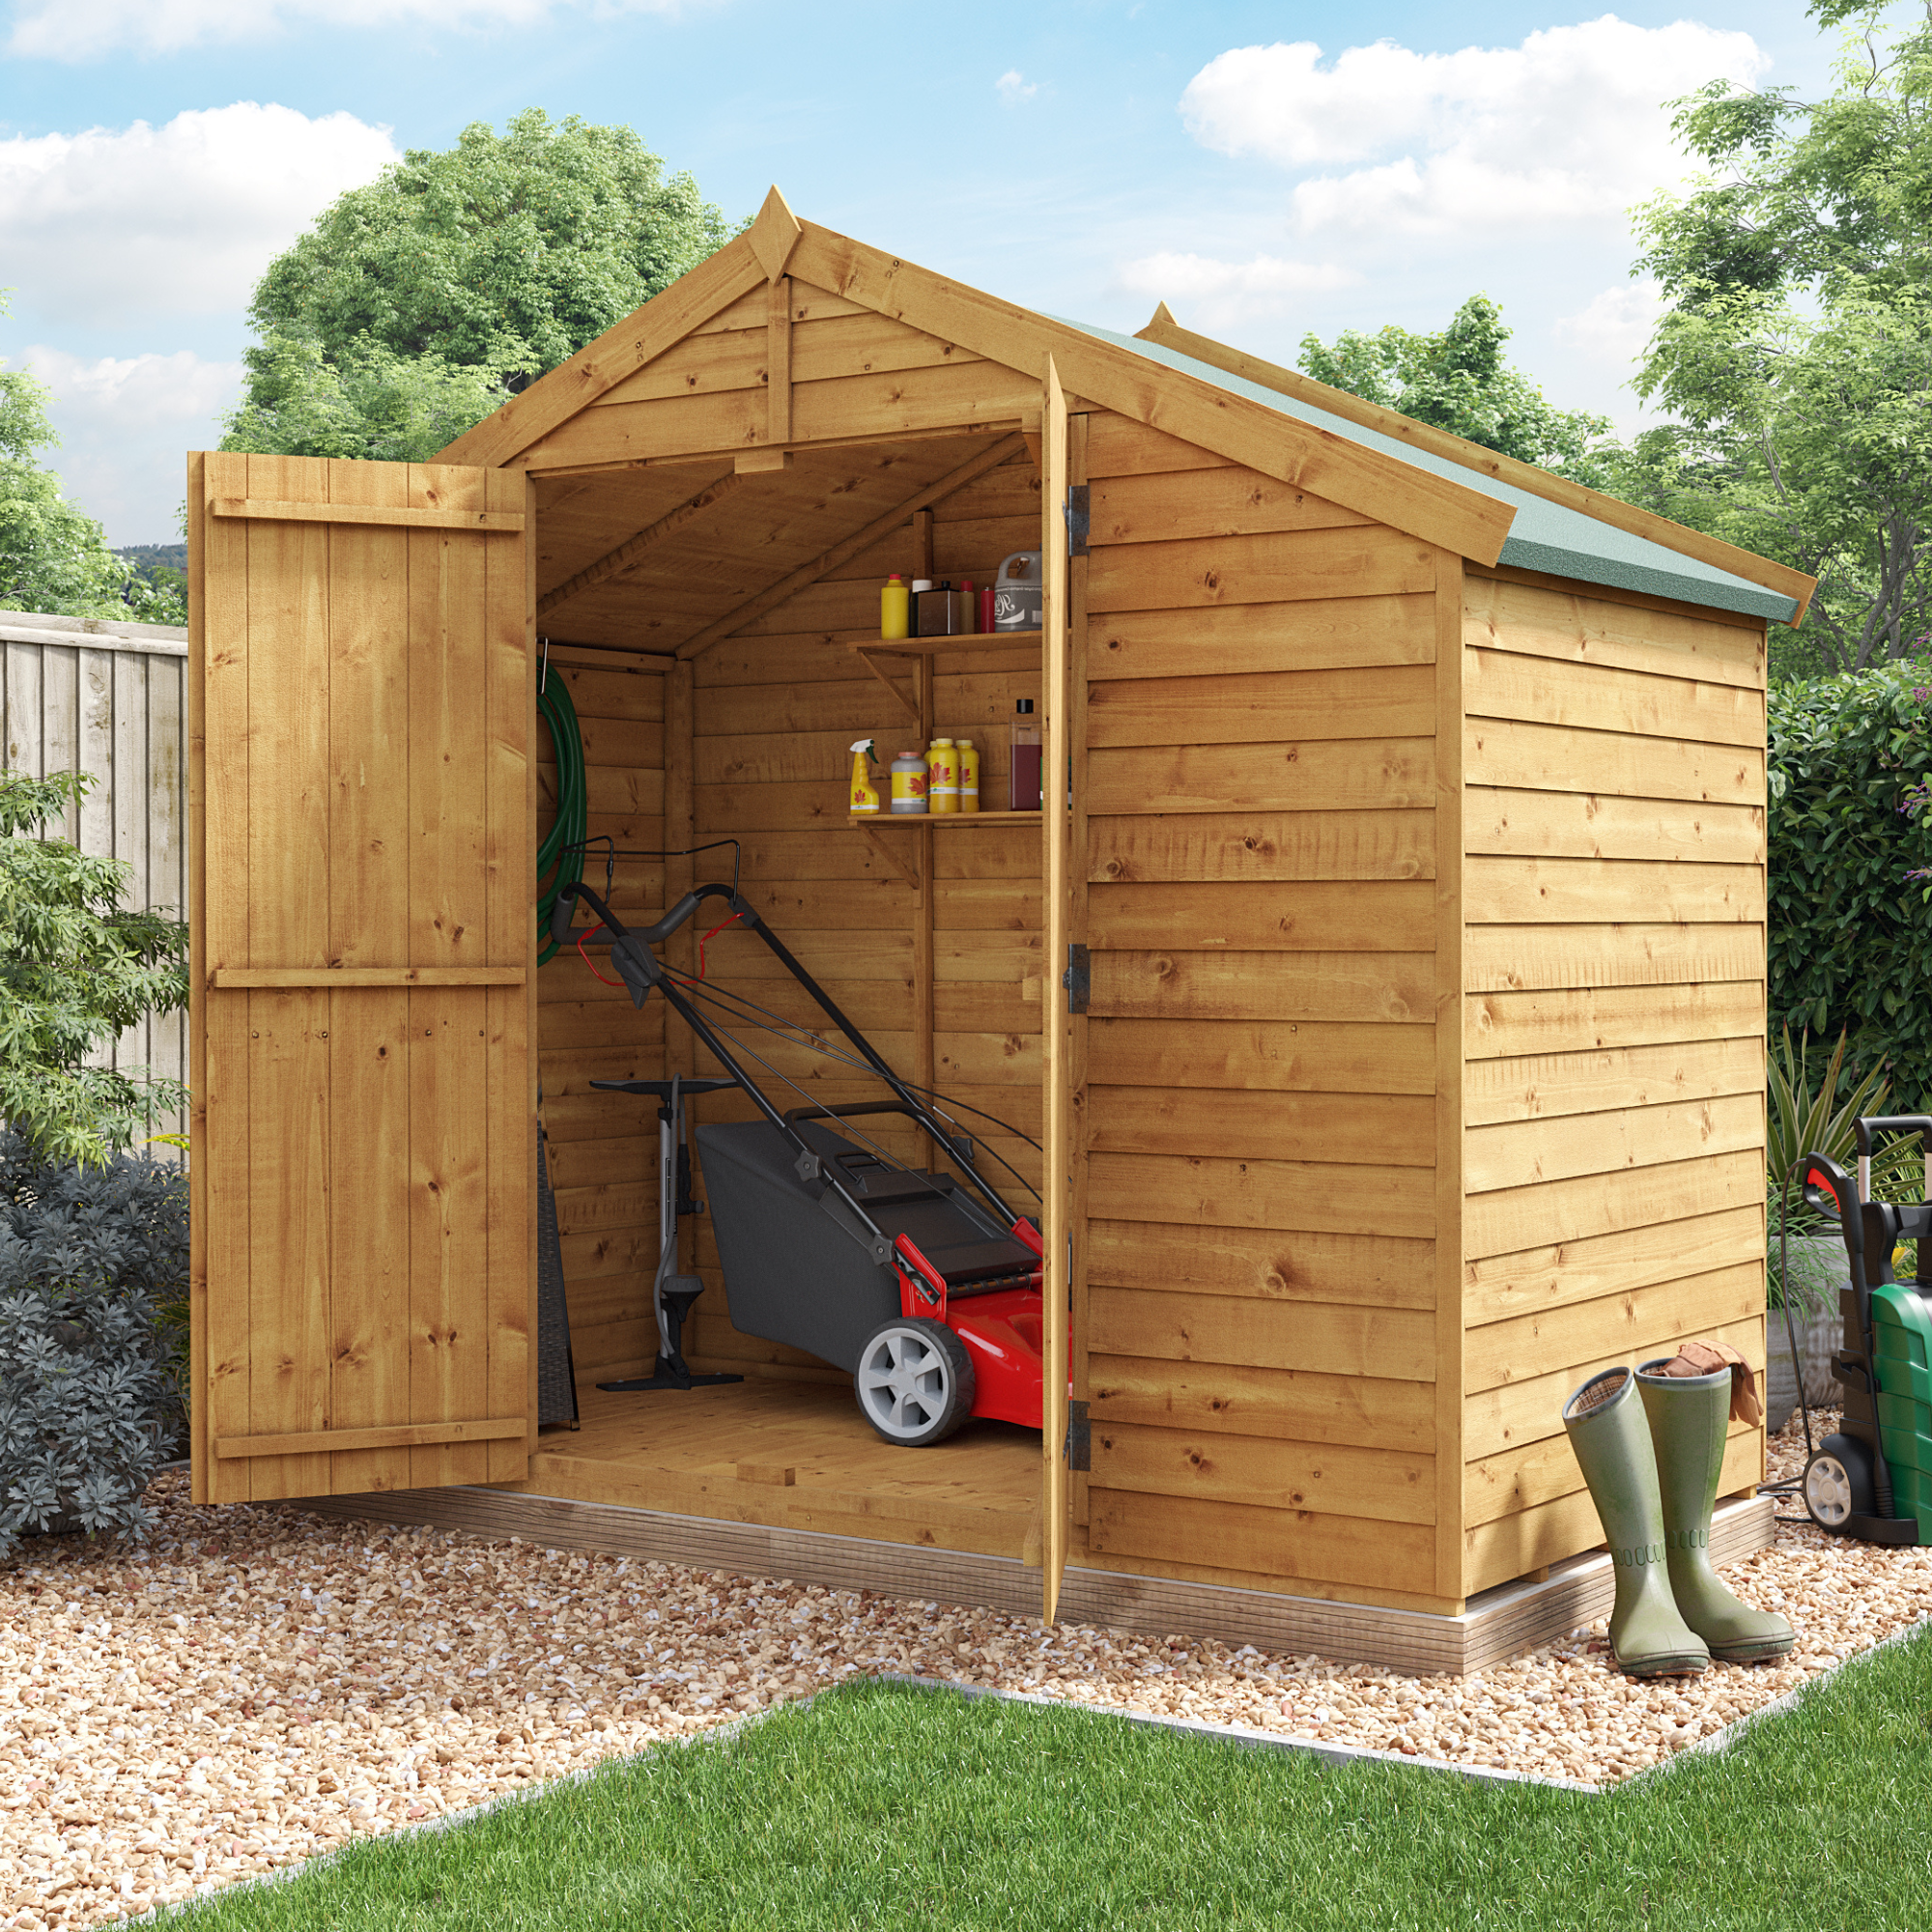 4 x 8 Shed - BillyOh Keeper Overlap Apex Wooden Shed - Windowless 4x8 Garden Shed